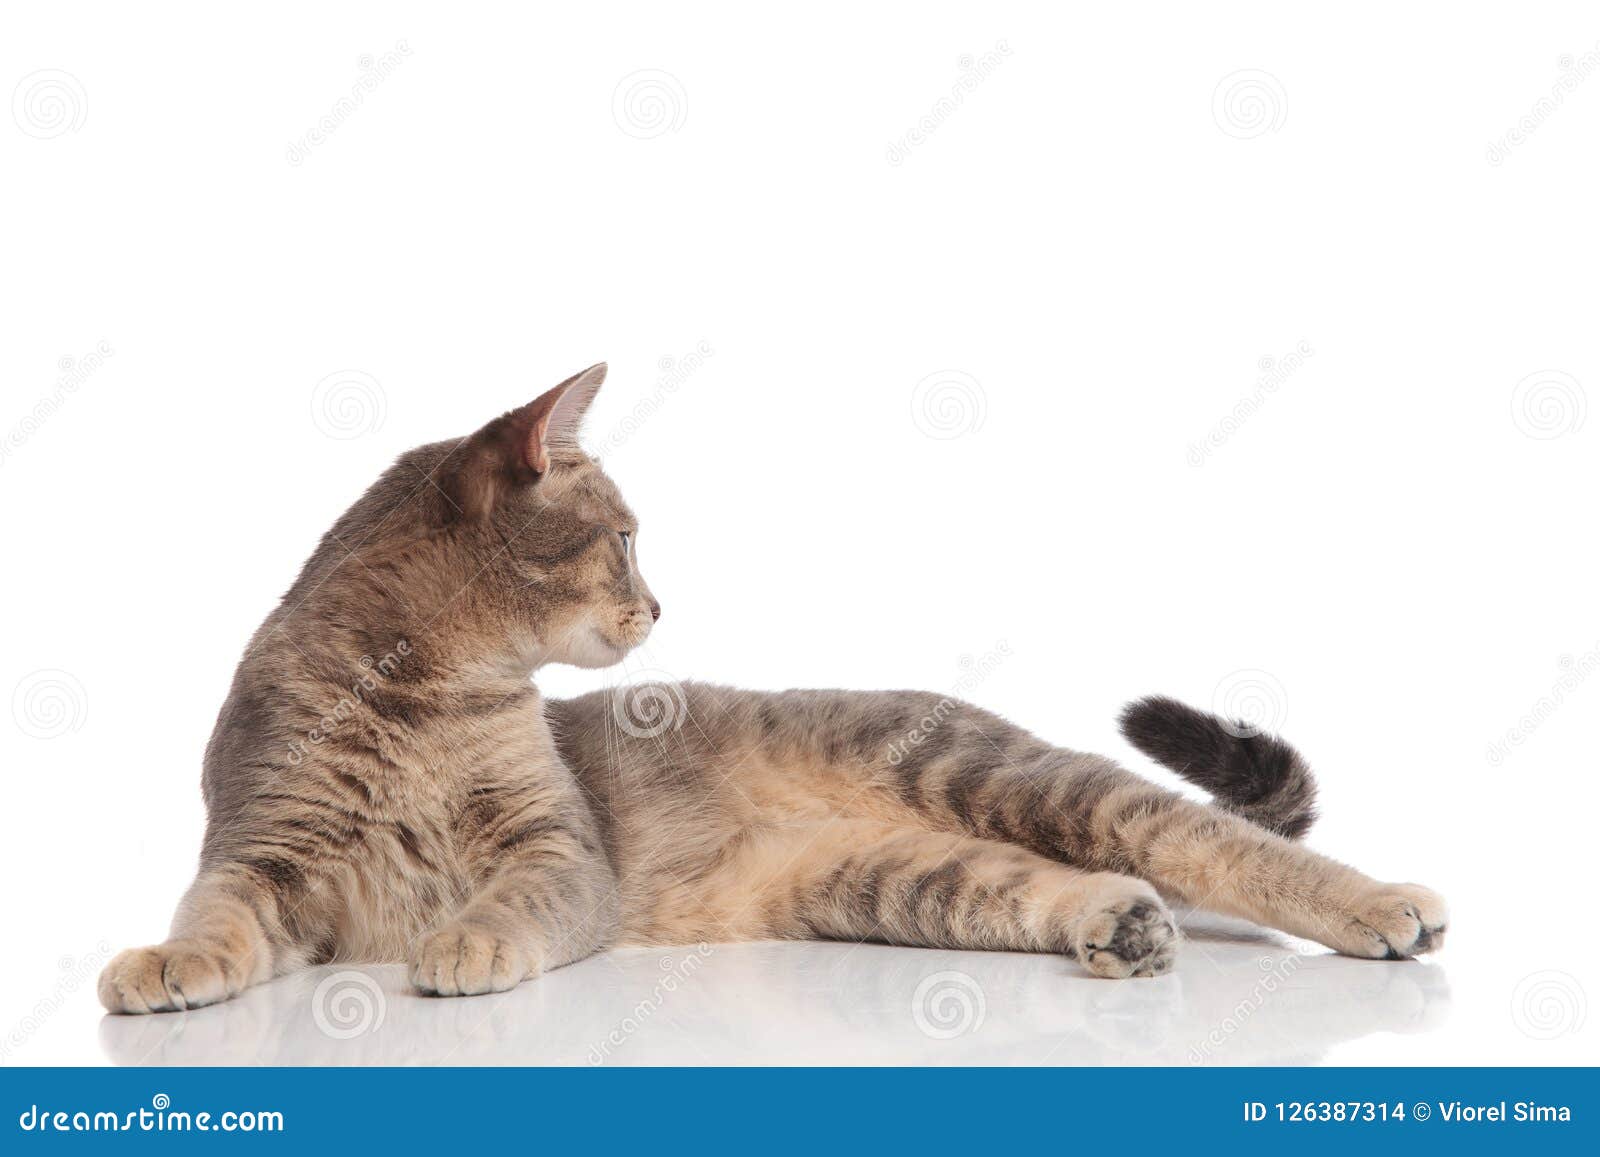 Side View Of Curious Metis Cat Lying Stock Photo Image of metis, grey